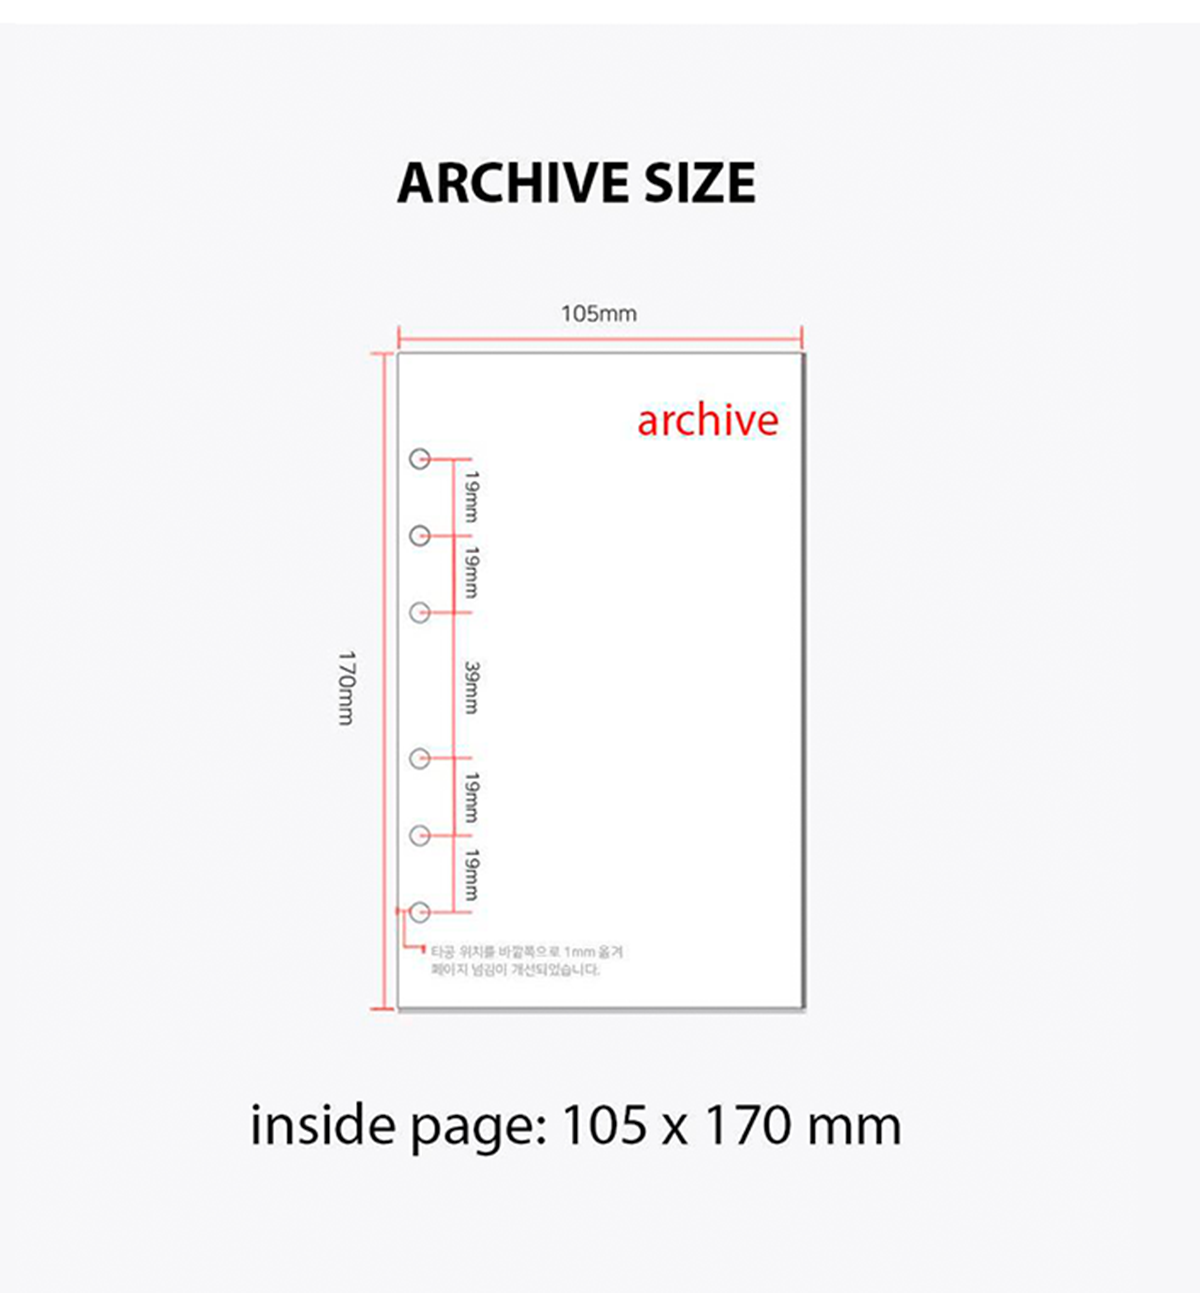 Archive Composition Hard Cover + Elastic [Black]